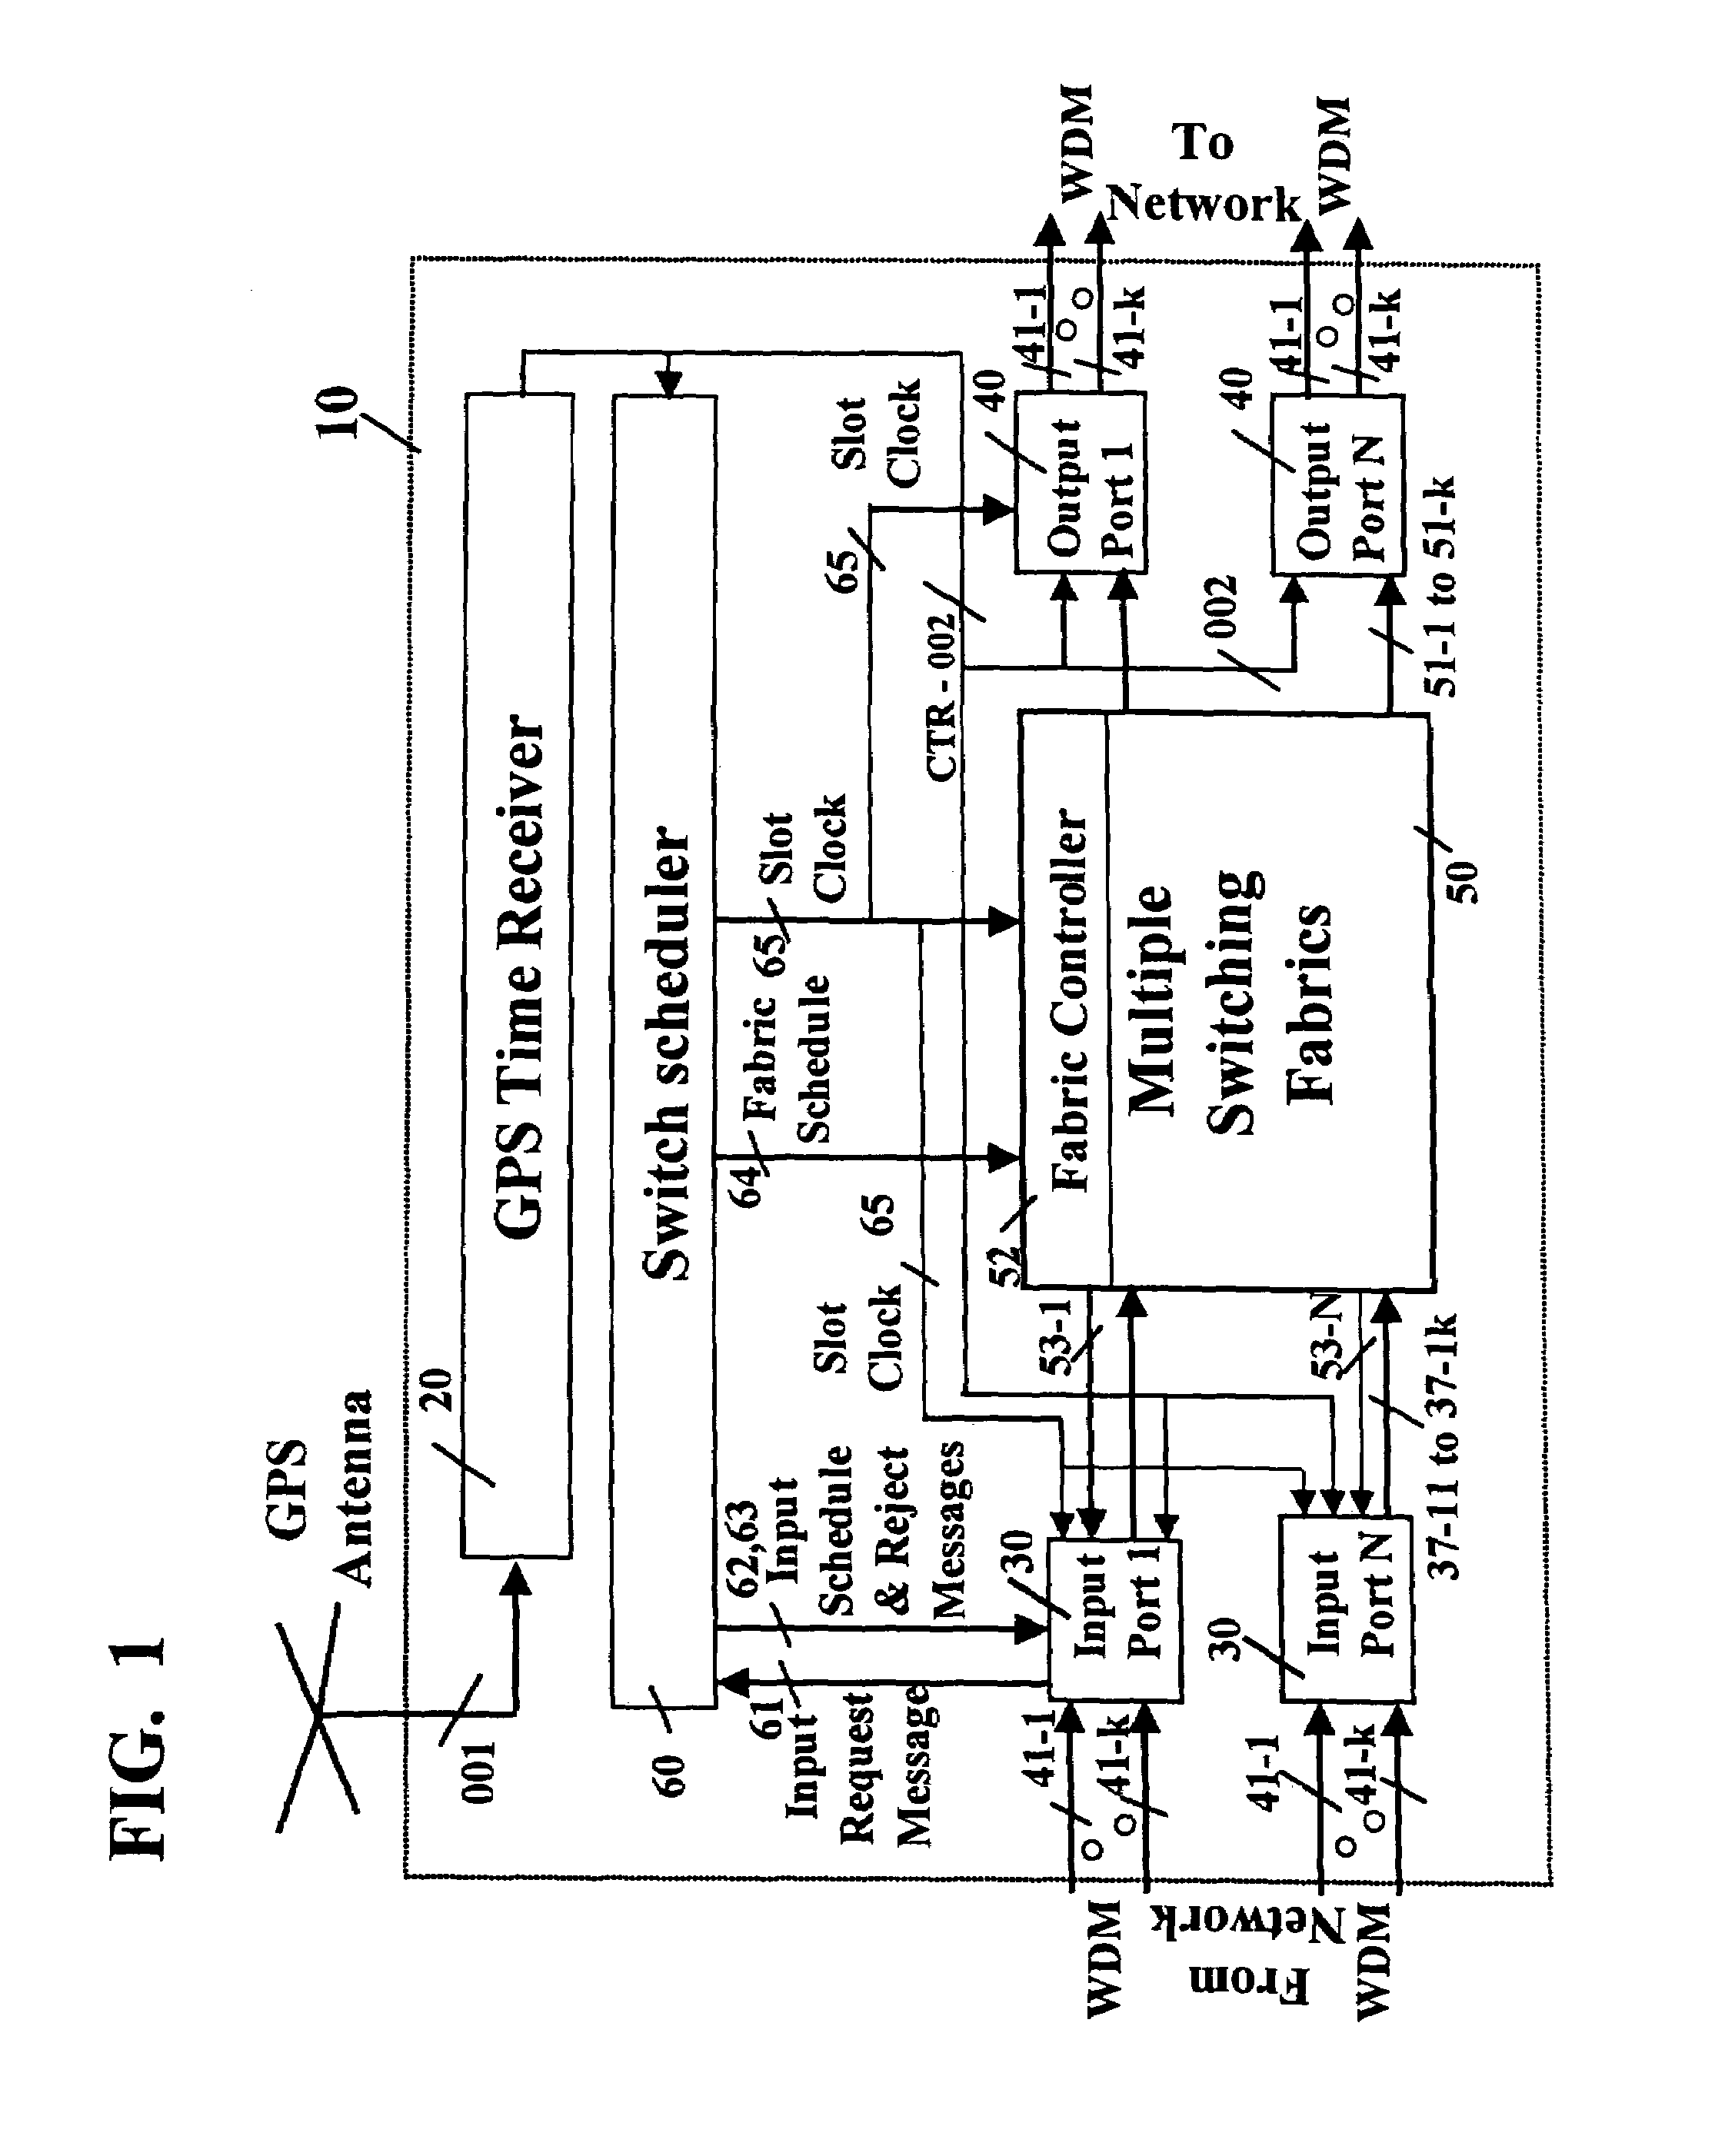 Switching system and methodology having scheduled connection on input and output ports responsive to common time reference